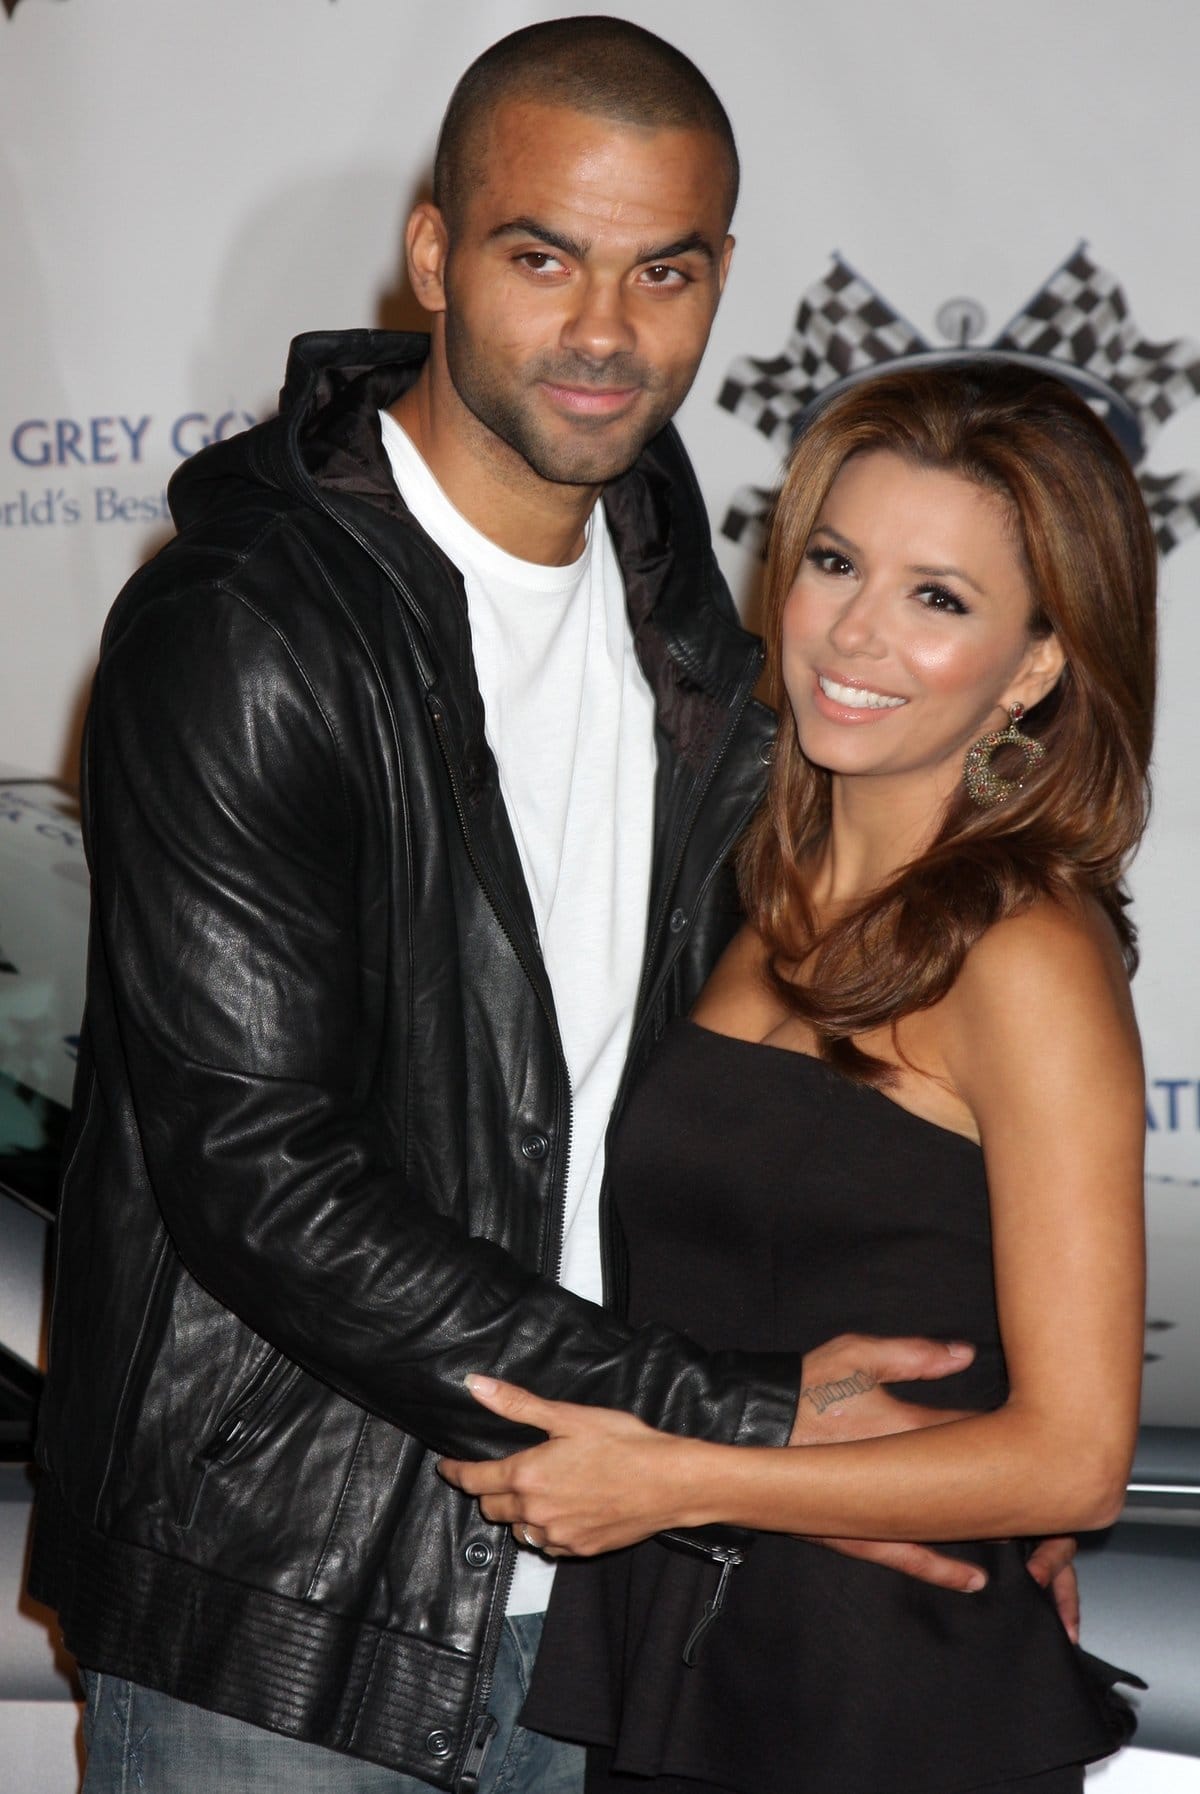 Tony Parker and Eva Longoria were married from 2007 to 2011 and announced their split in late 2010